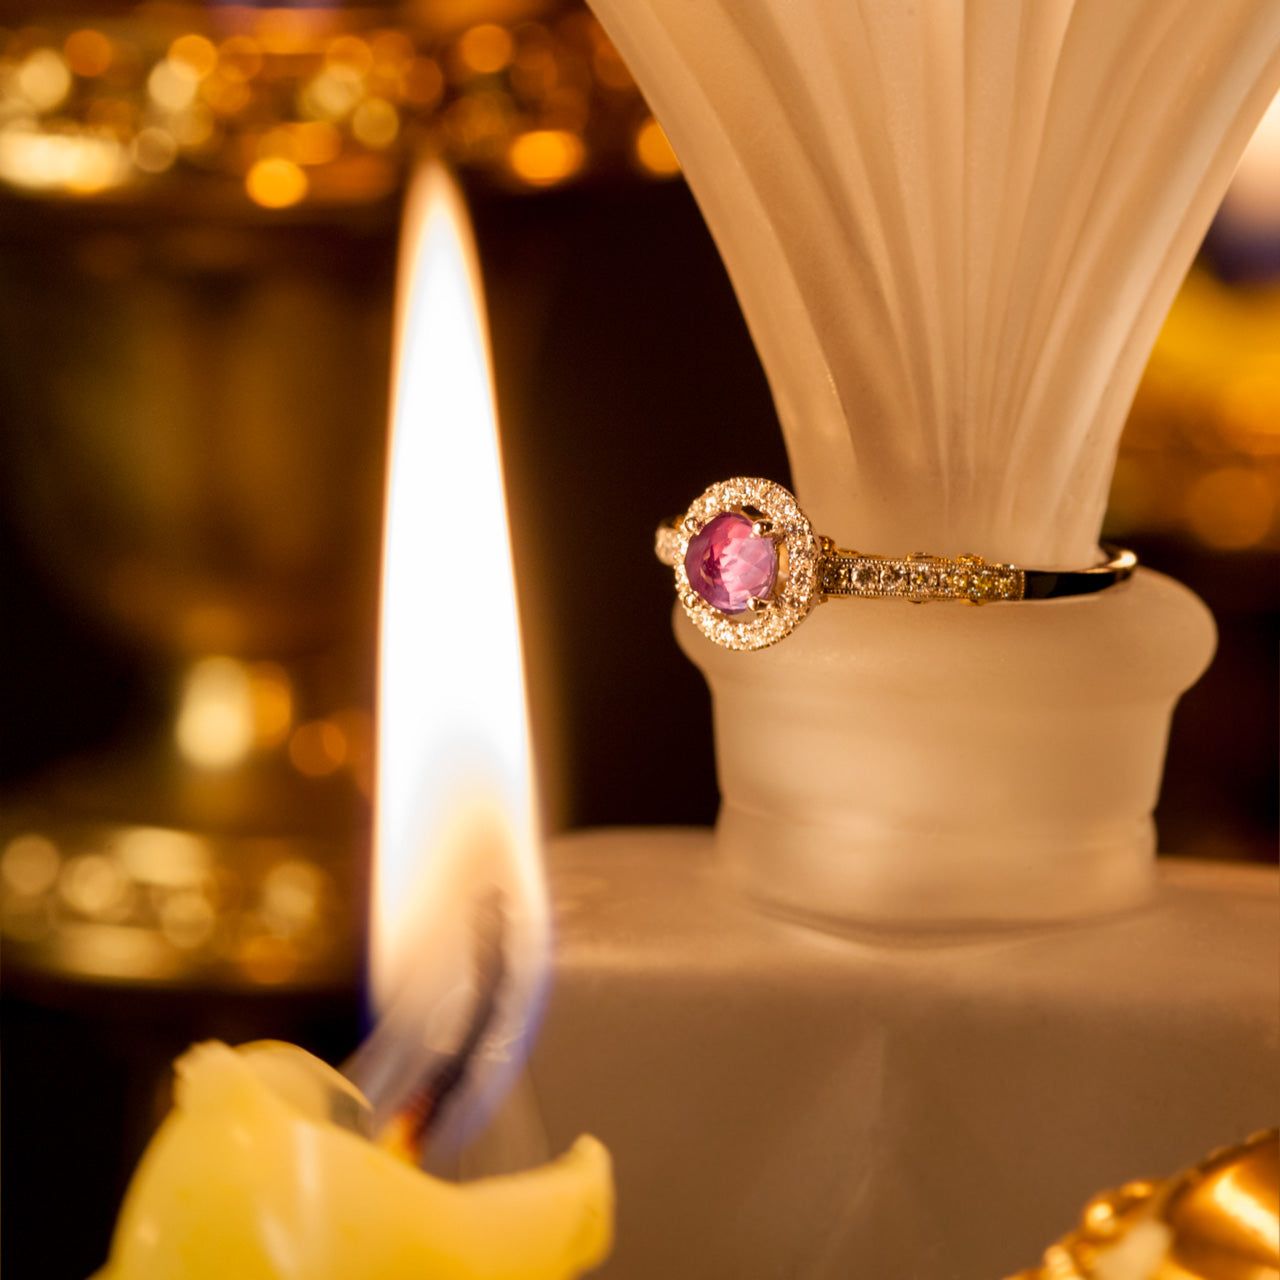 0.56ct alexandrite set in an 18k gold ring resting atop a candle